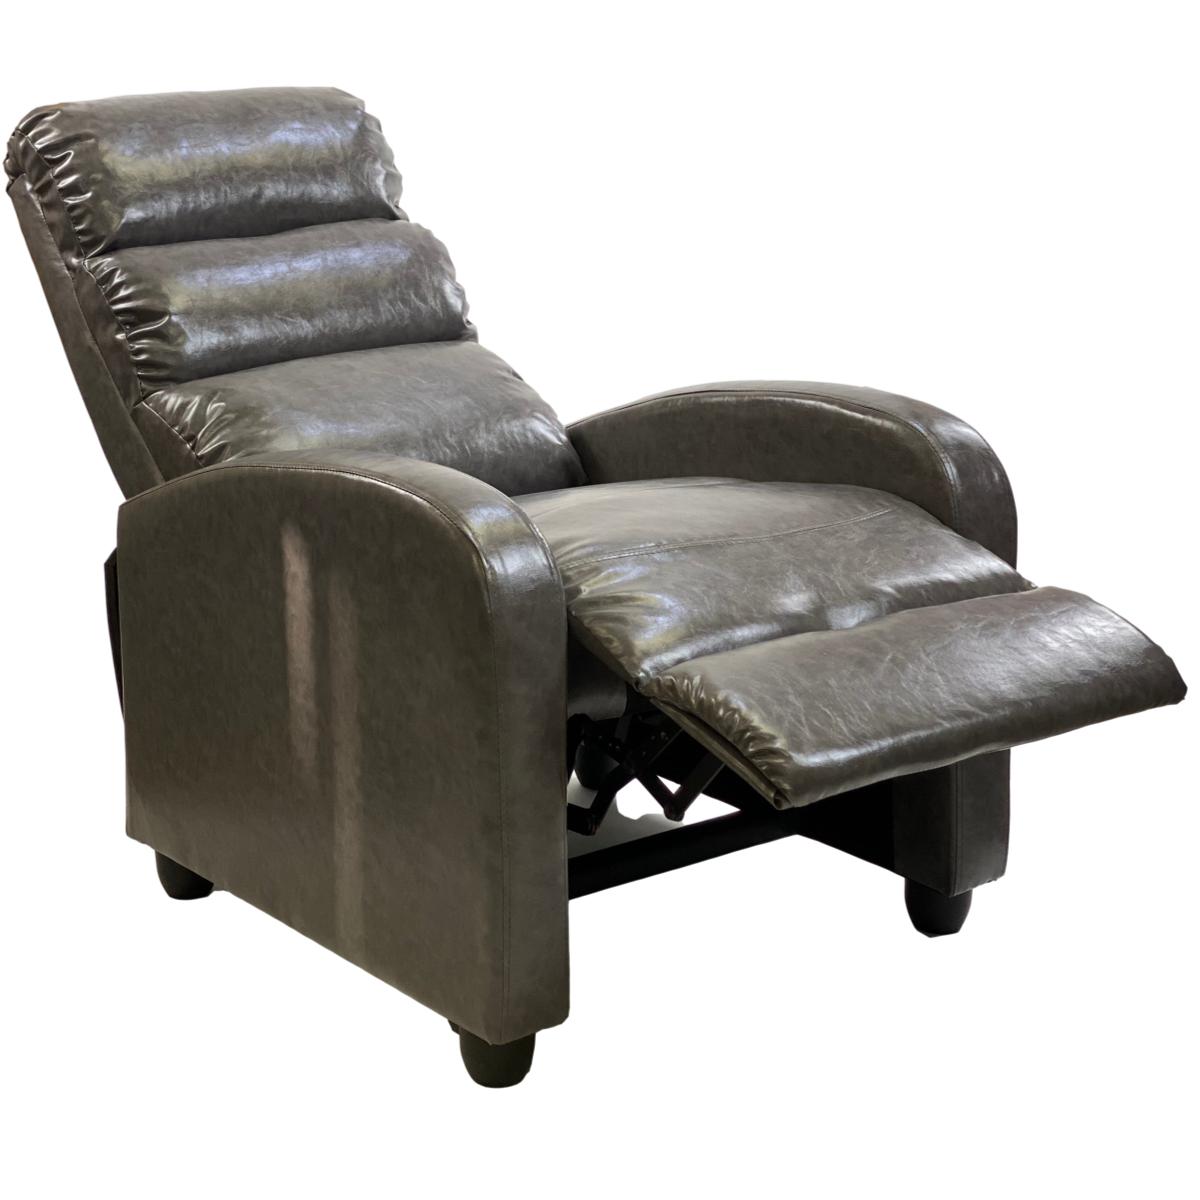 ViscoLogic EuroLuxe Theatre Seating Living Room  Lounge Adjustable Manual Recliner Sofa Chair